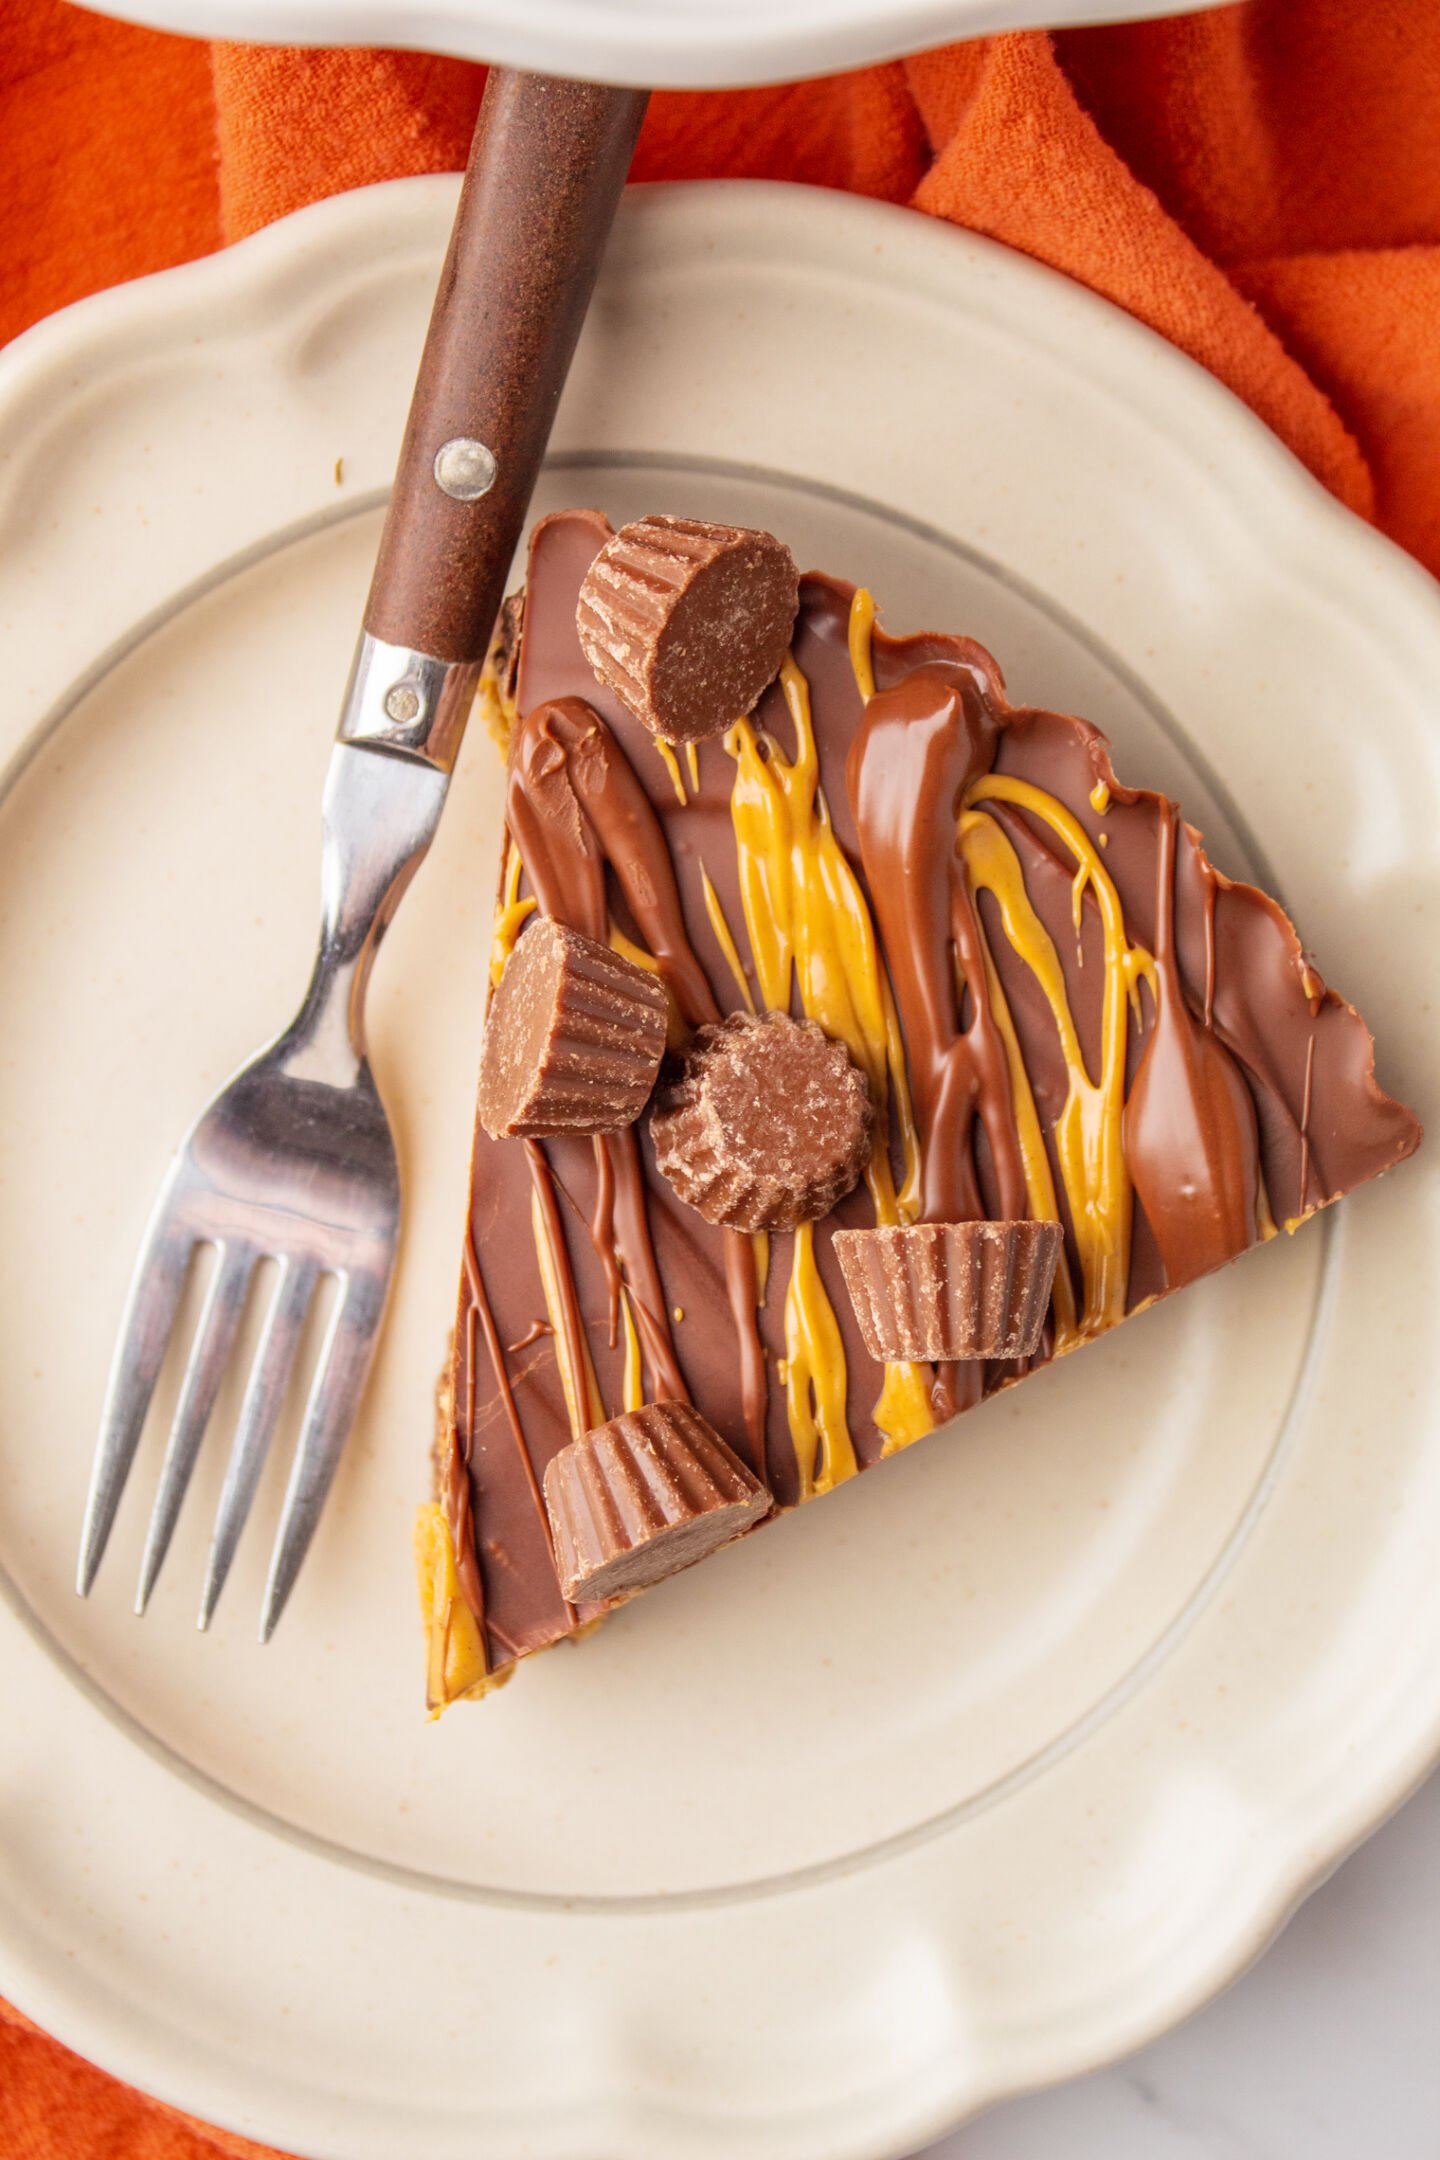 Cut reese's peanut butter pie into slices, serve with whipped cream